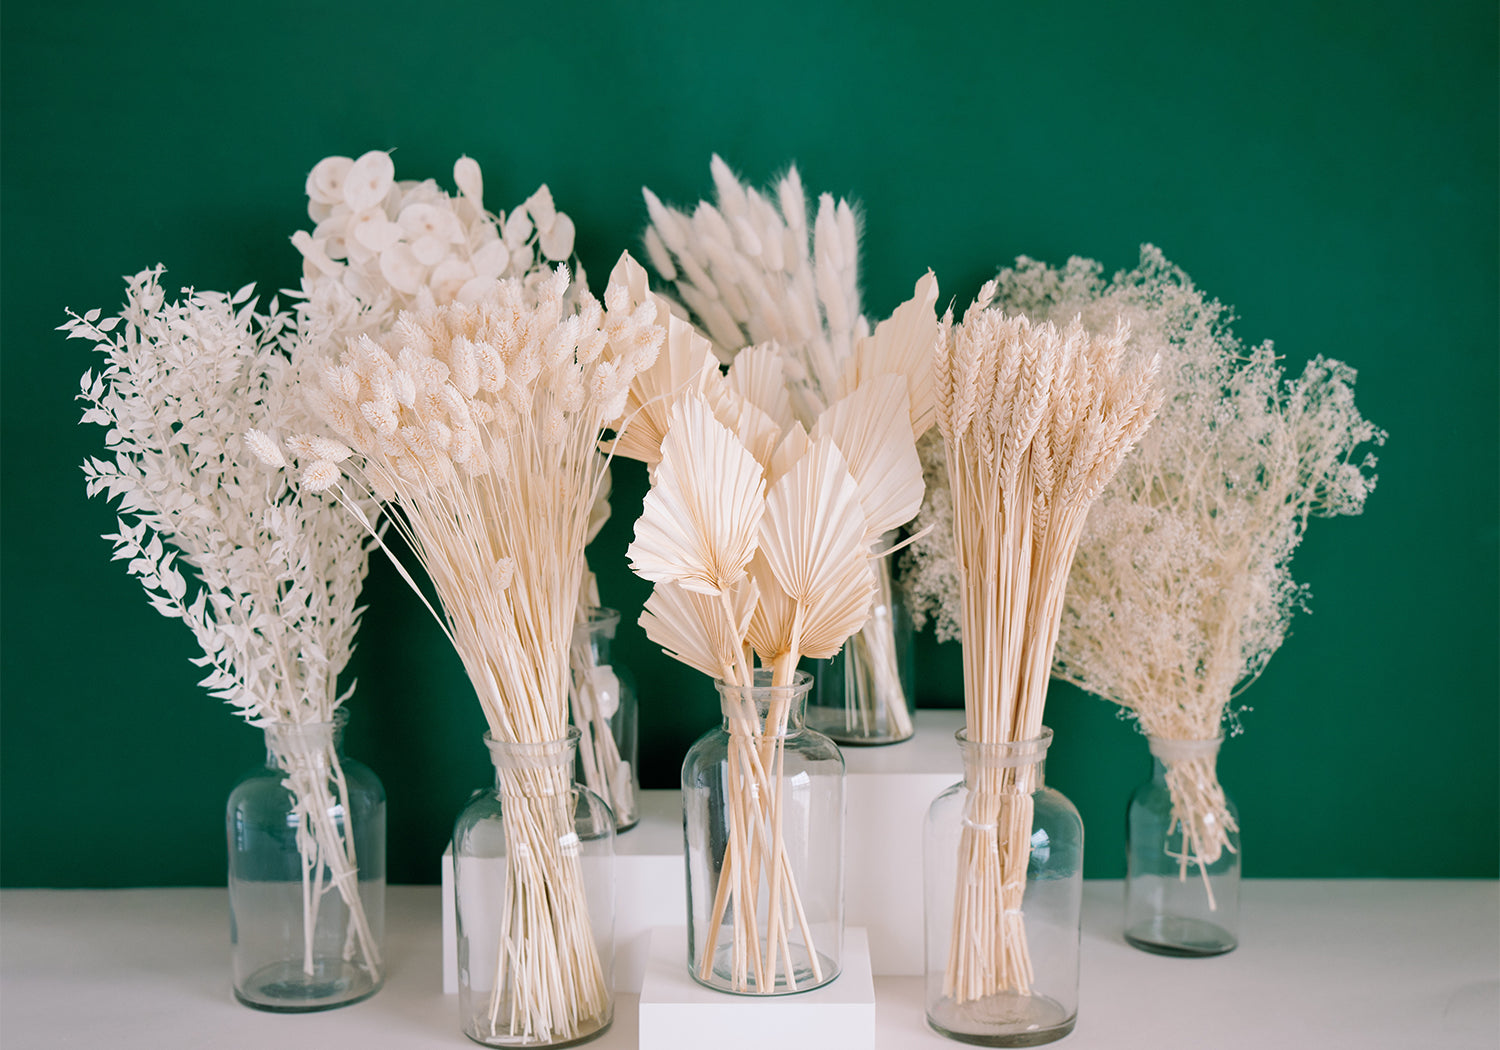 DIY Wedding Floral Supplies, Dried Flowers, Cheap Vases